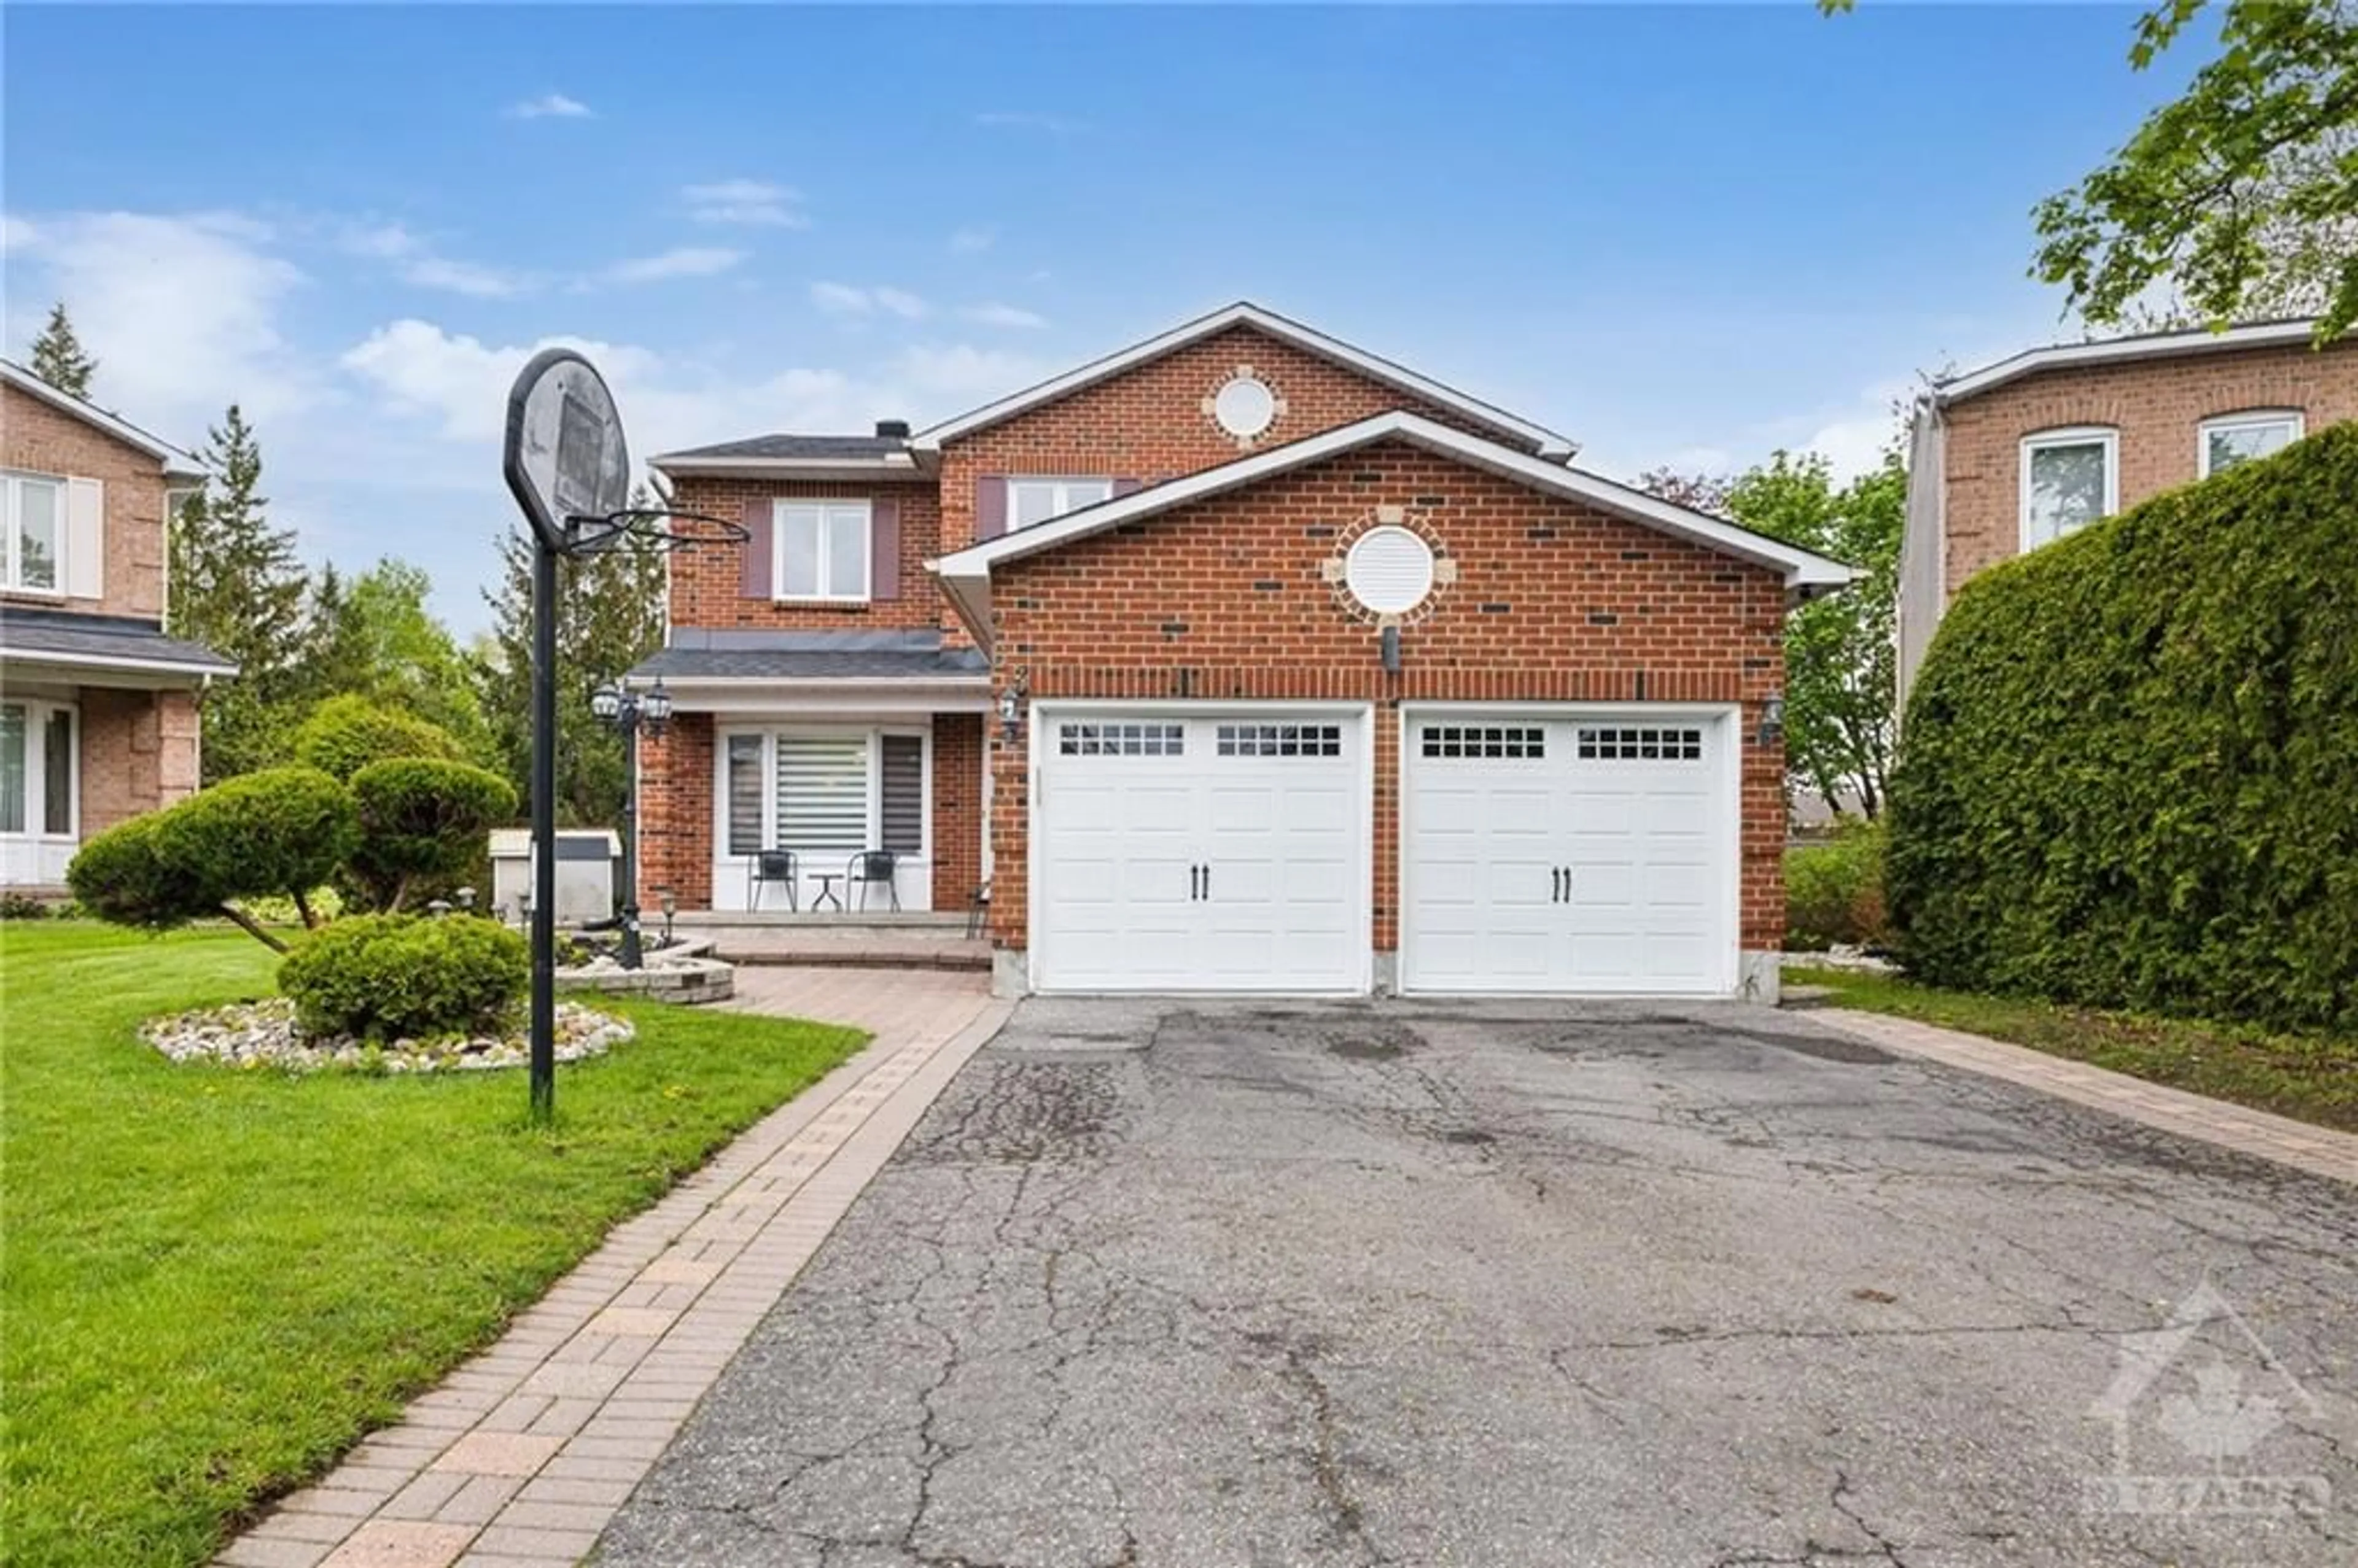 Home with brick exterior material for 63 DOSSETTER Way, Ottawa Ontario K1G 4S8